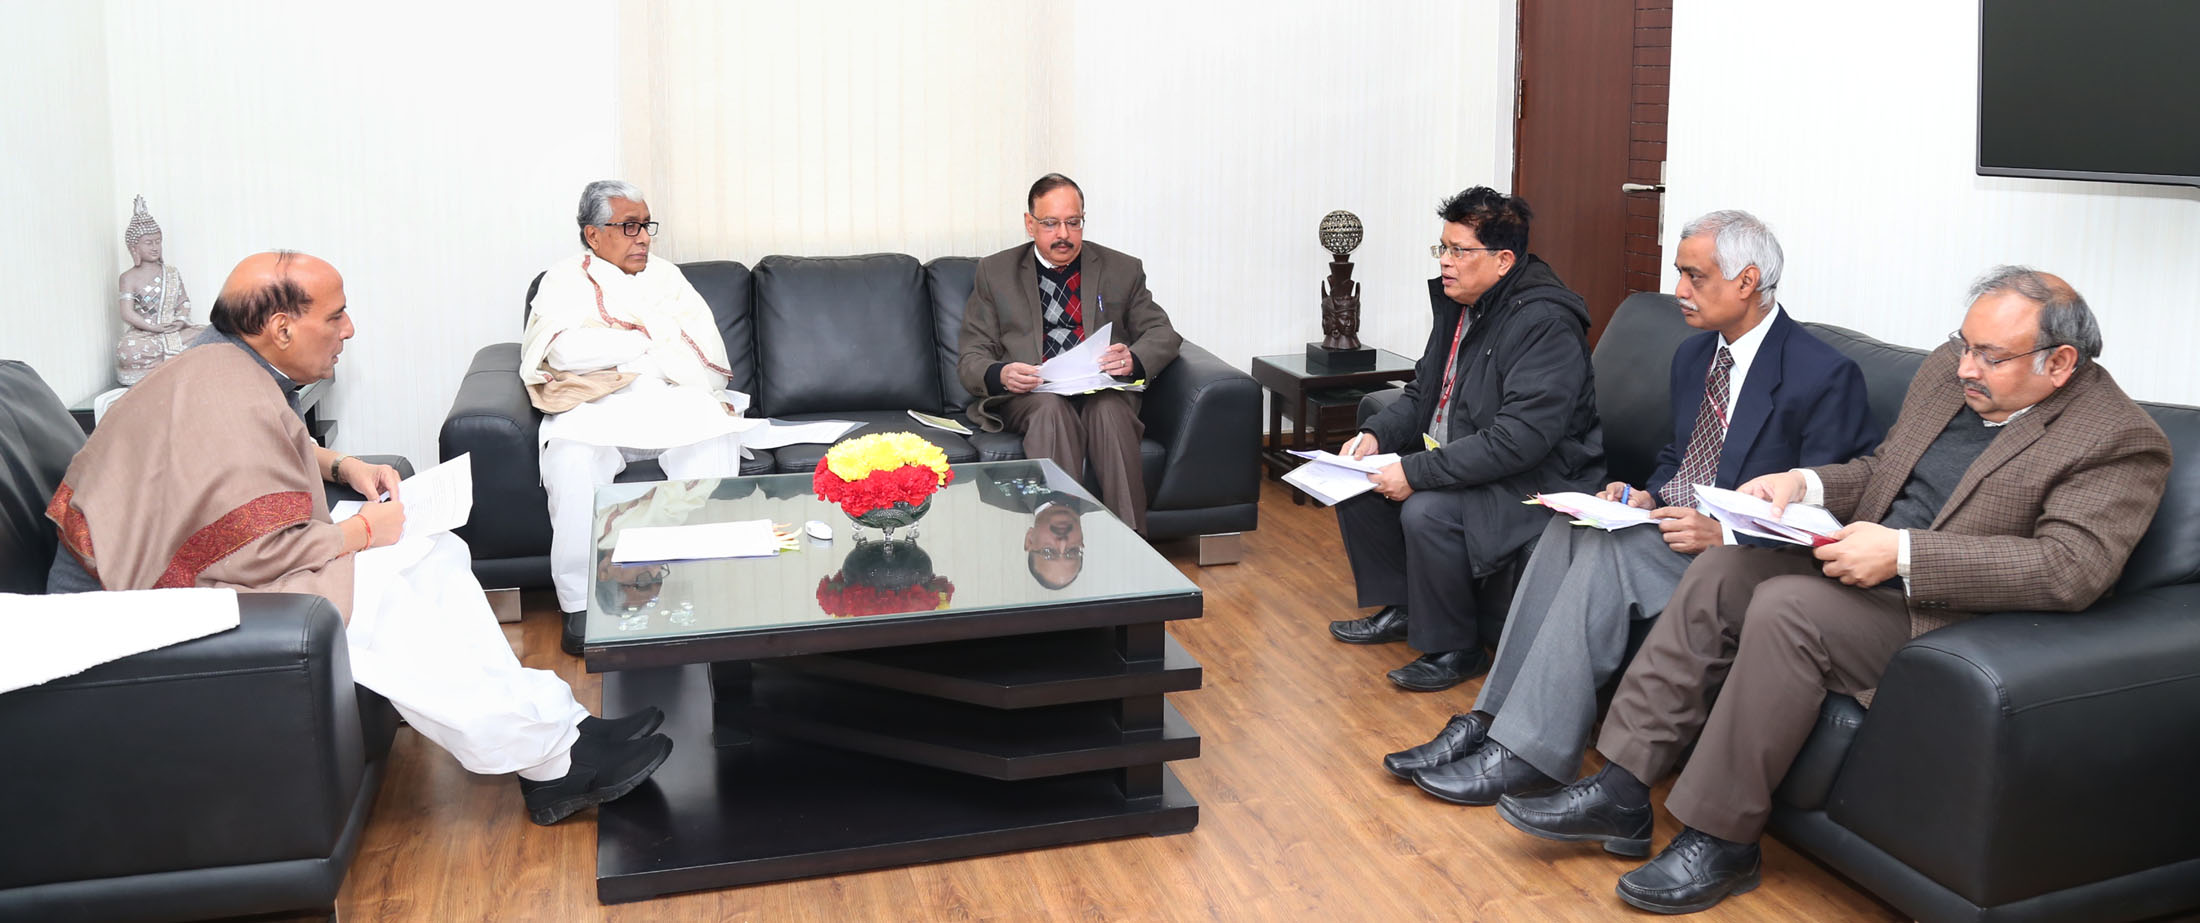 The Chief Minister of Tripura, Shri Manik Sarkar meeting the Union Home Minister, Shri Rajnath Singh, in New Delhi on January 18, 2017. 	The Senior Officers of MHA are also seen.